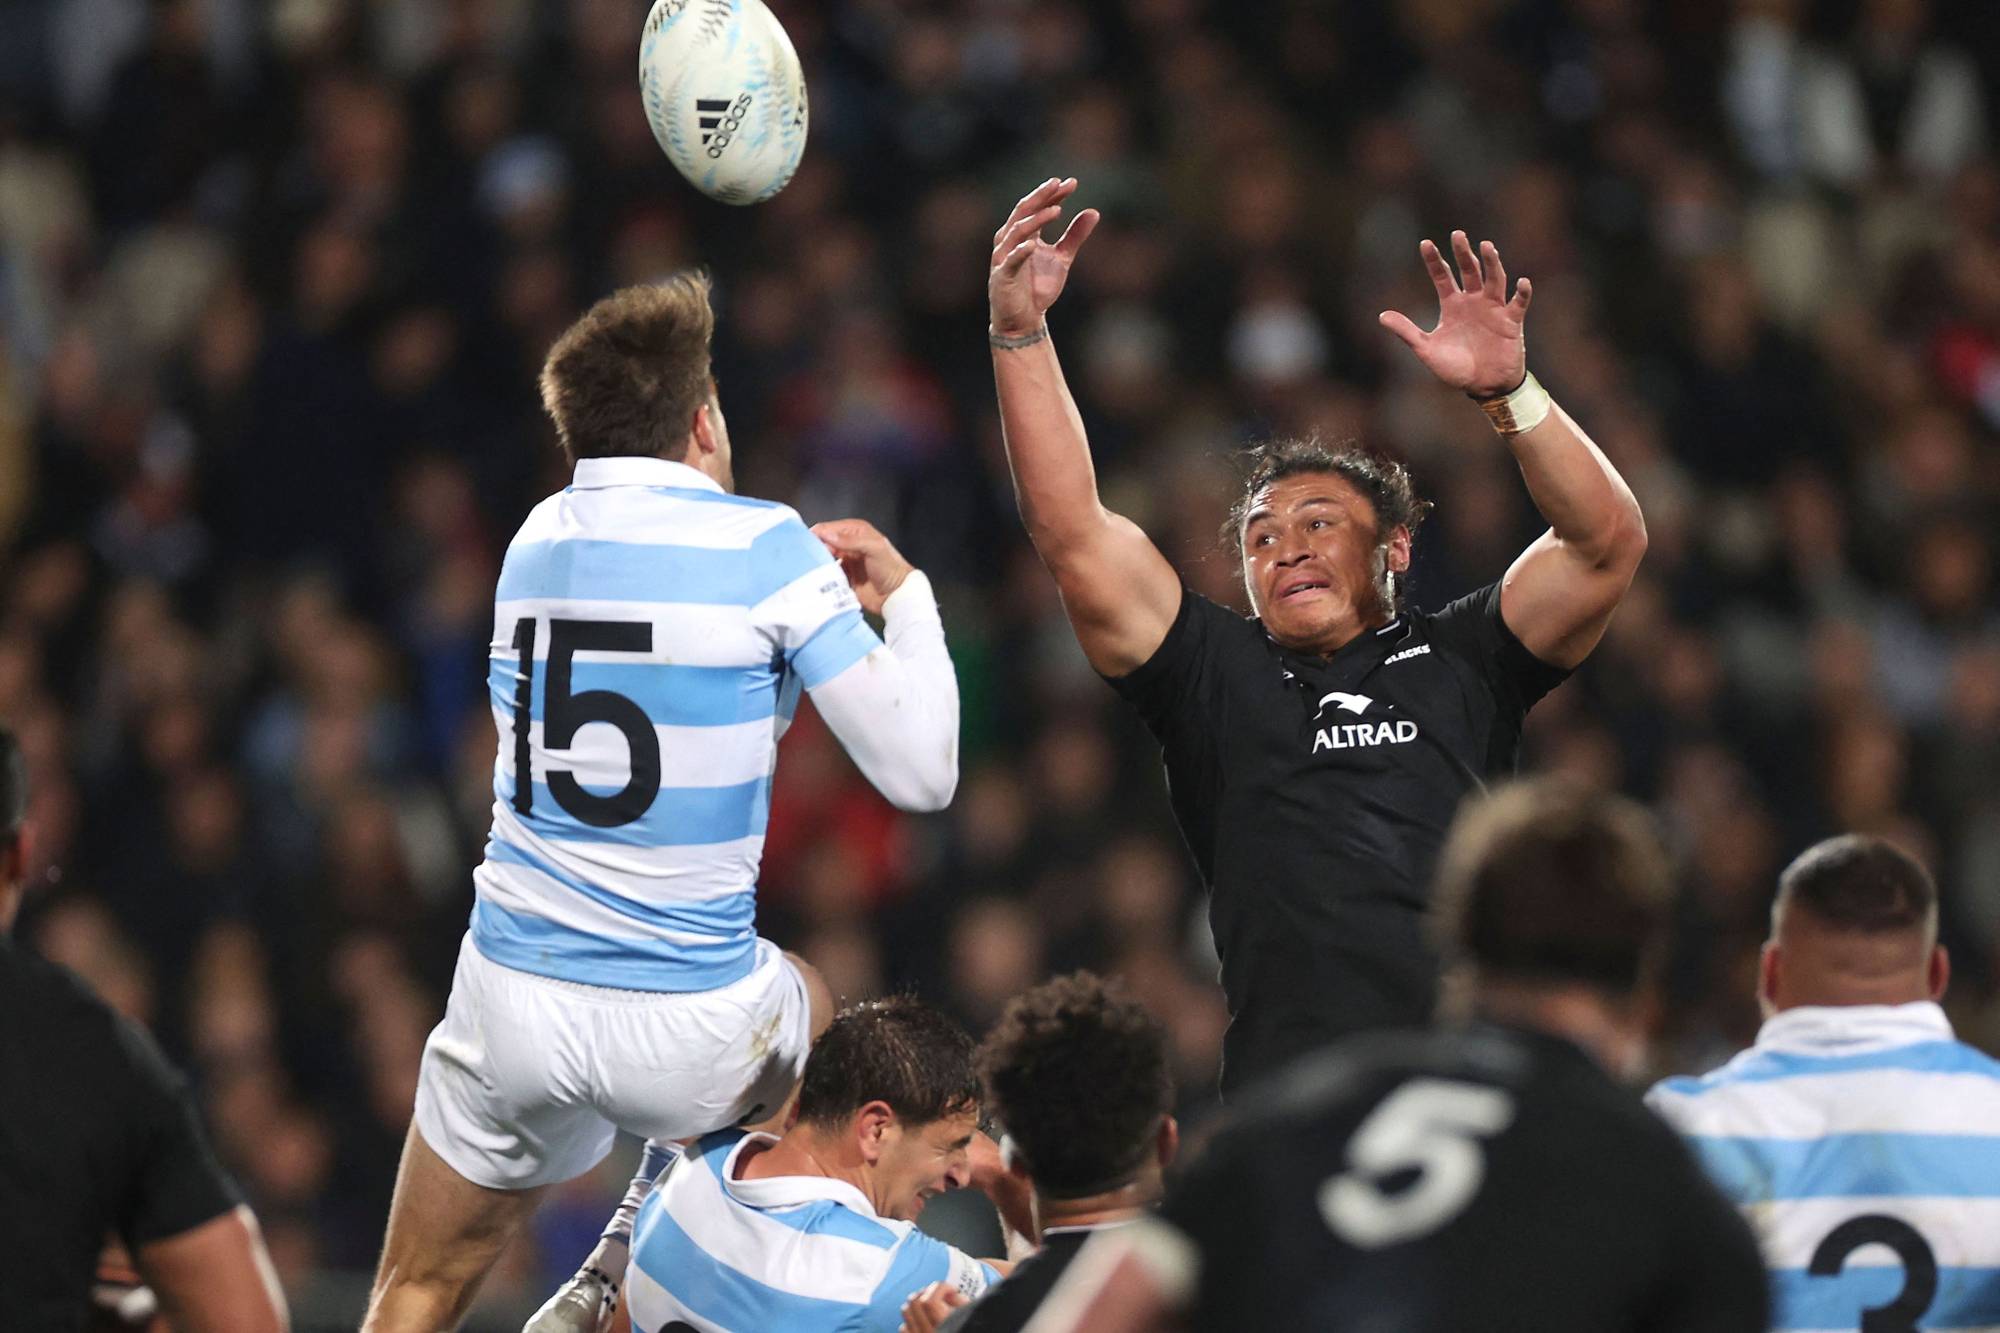 All Blacks coach Ian Foster stands by choices as team looks to bounce back against Argentina